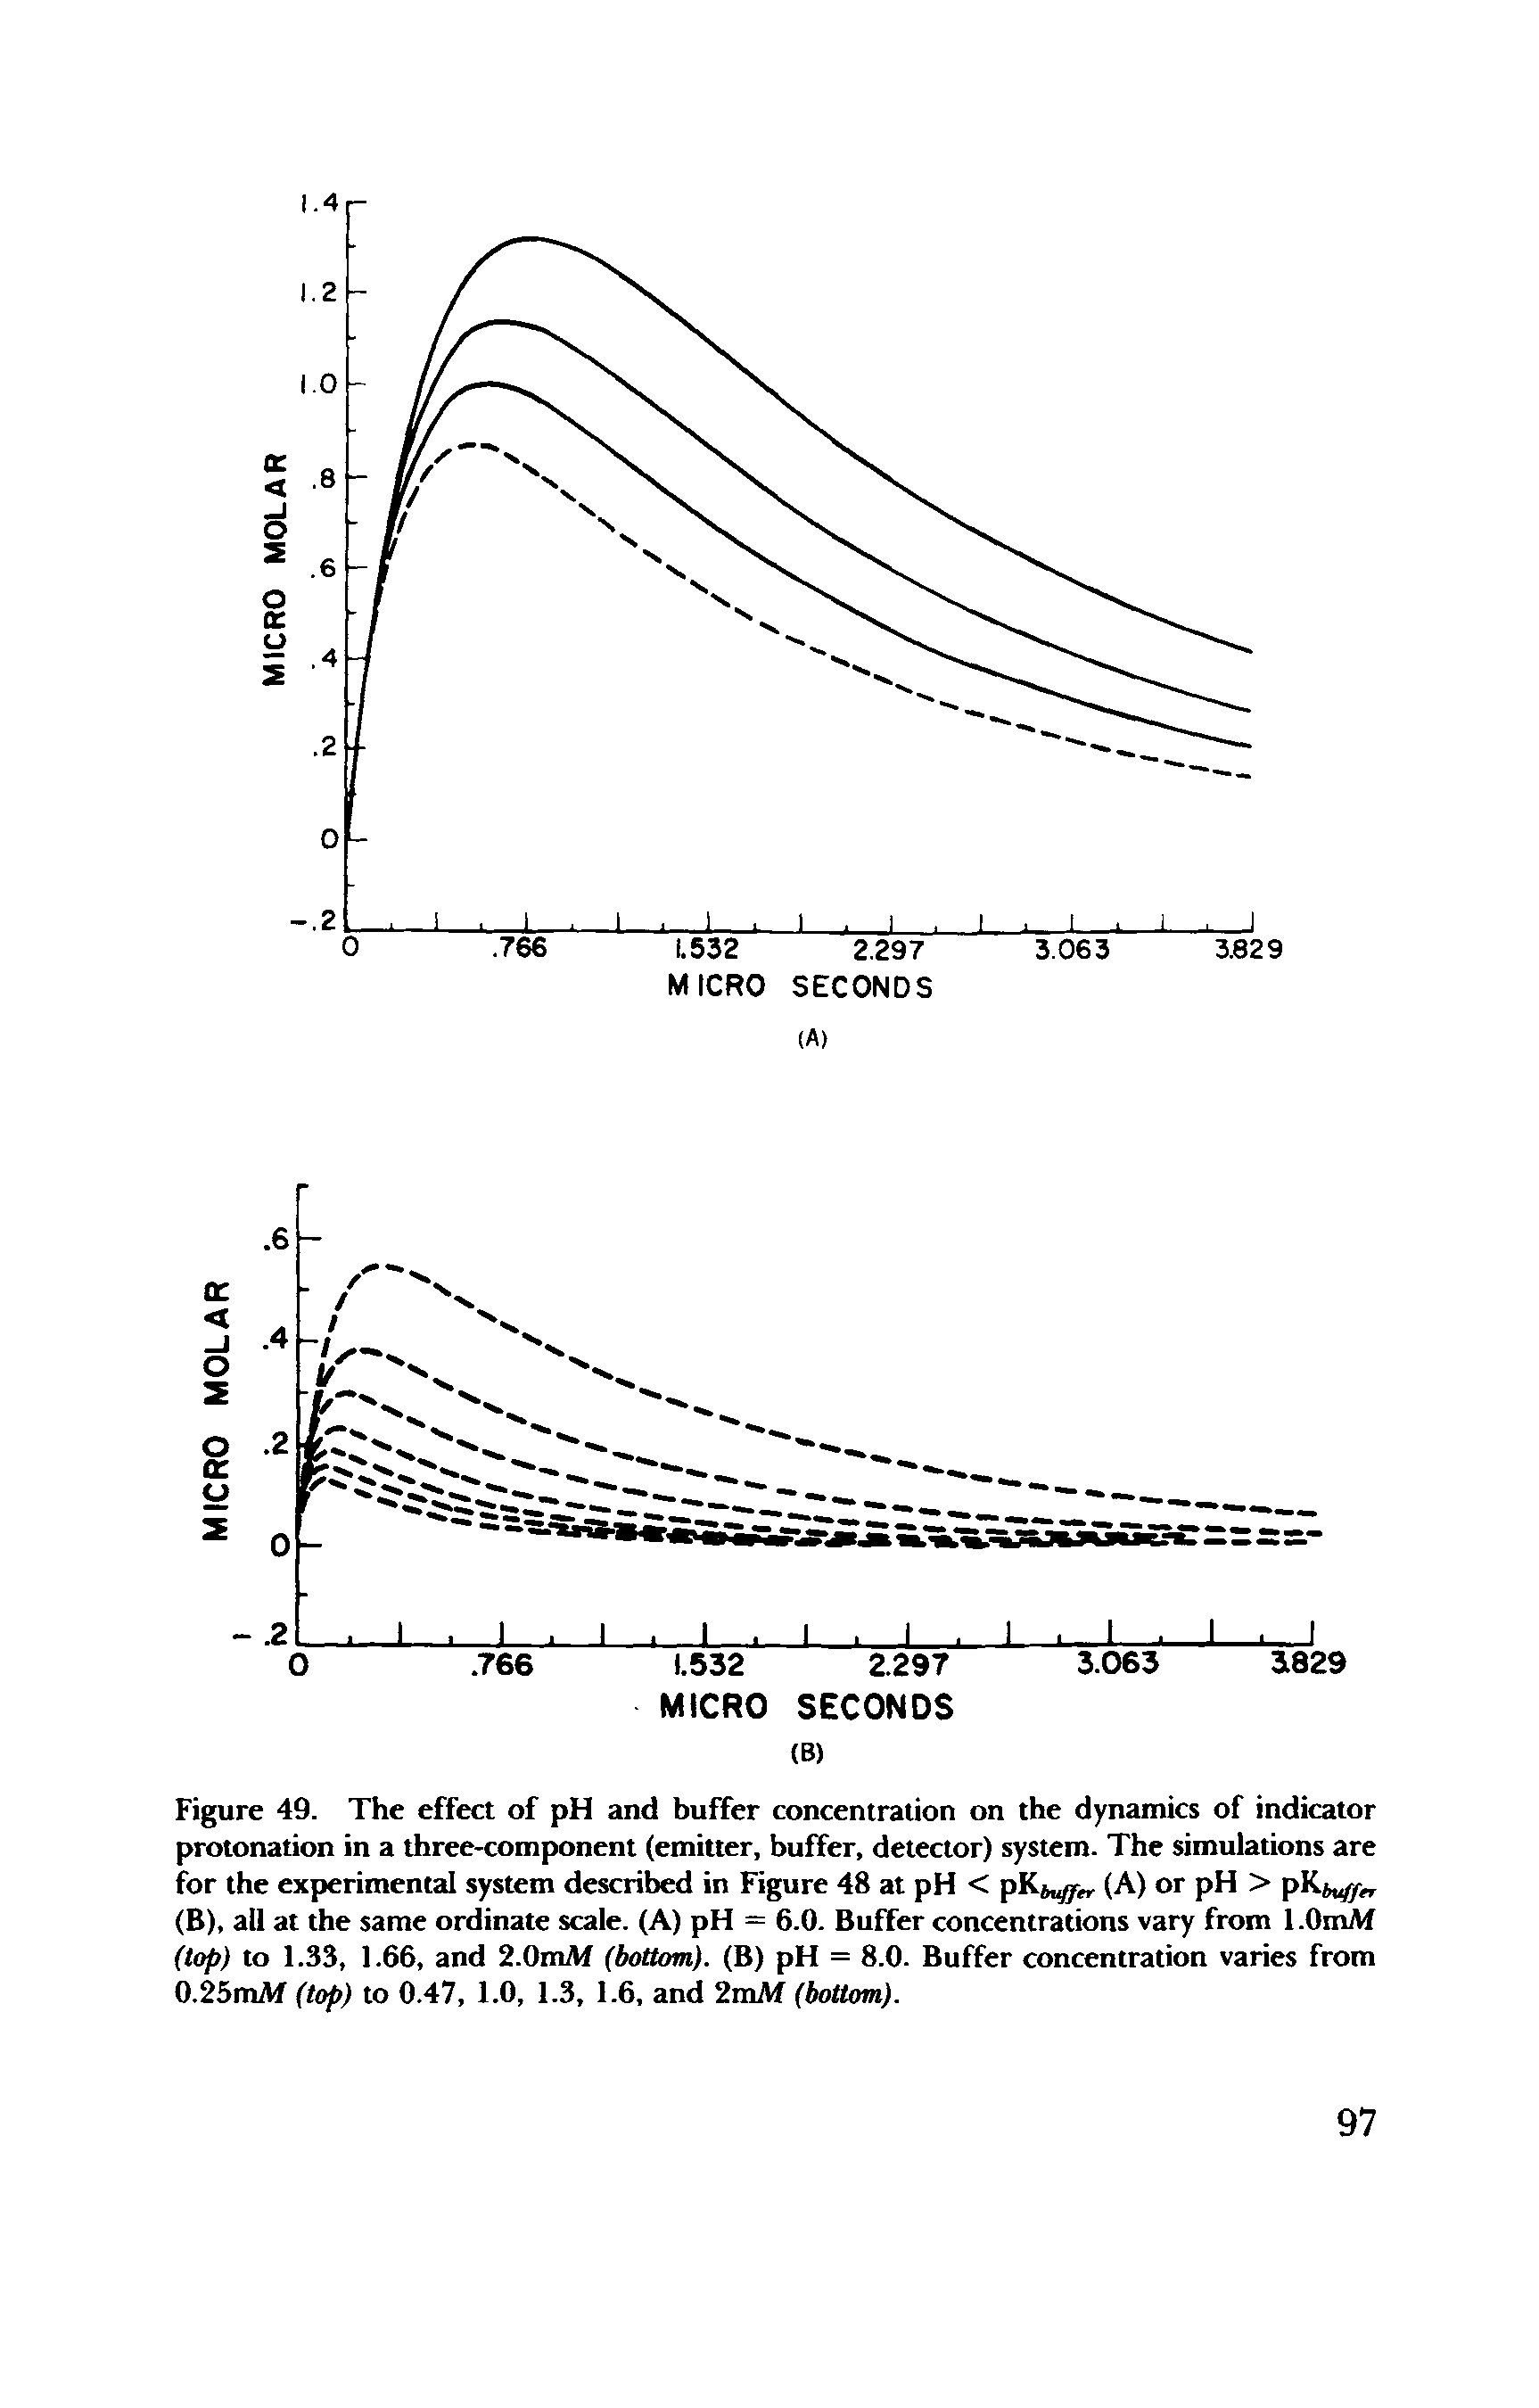 Figure 49. The effect of pH and buffer concentration on the dynamics of indicator protonation in a three-component (emitter, buffer, detector) system. The simulations are for the experimental system described in Figure 48 at pH < pK, (A) or pH > pK. (B), all at the same ordinate scale. (A) pH = 6.0. Buffer concentrations vary from l.OmAf (top) to 1.33, 1.66, and 2.0mAf (bottom). (B) pH = 8.0. Buffer concentration varies from 0.25mAf (top) to 0.47, 1.0, 1.3, 1.6, and 2mM (bottom).